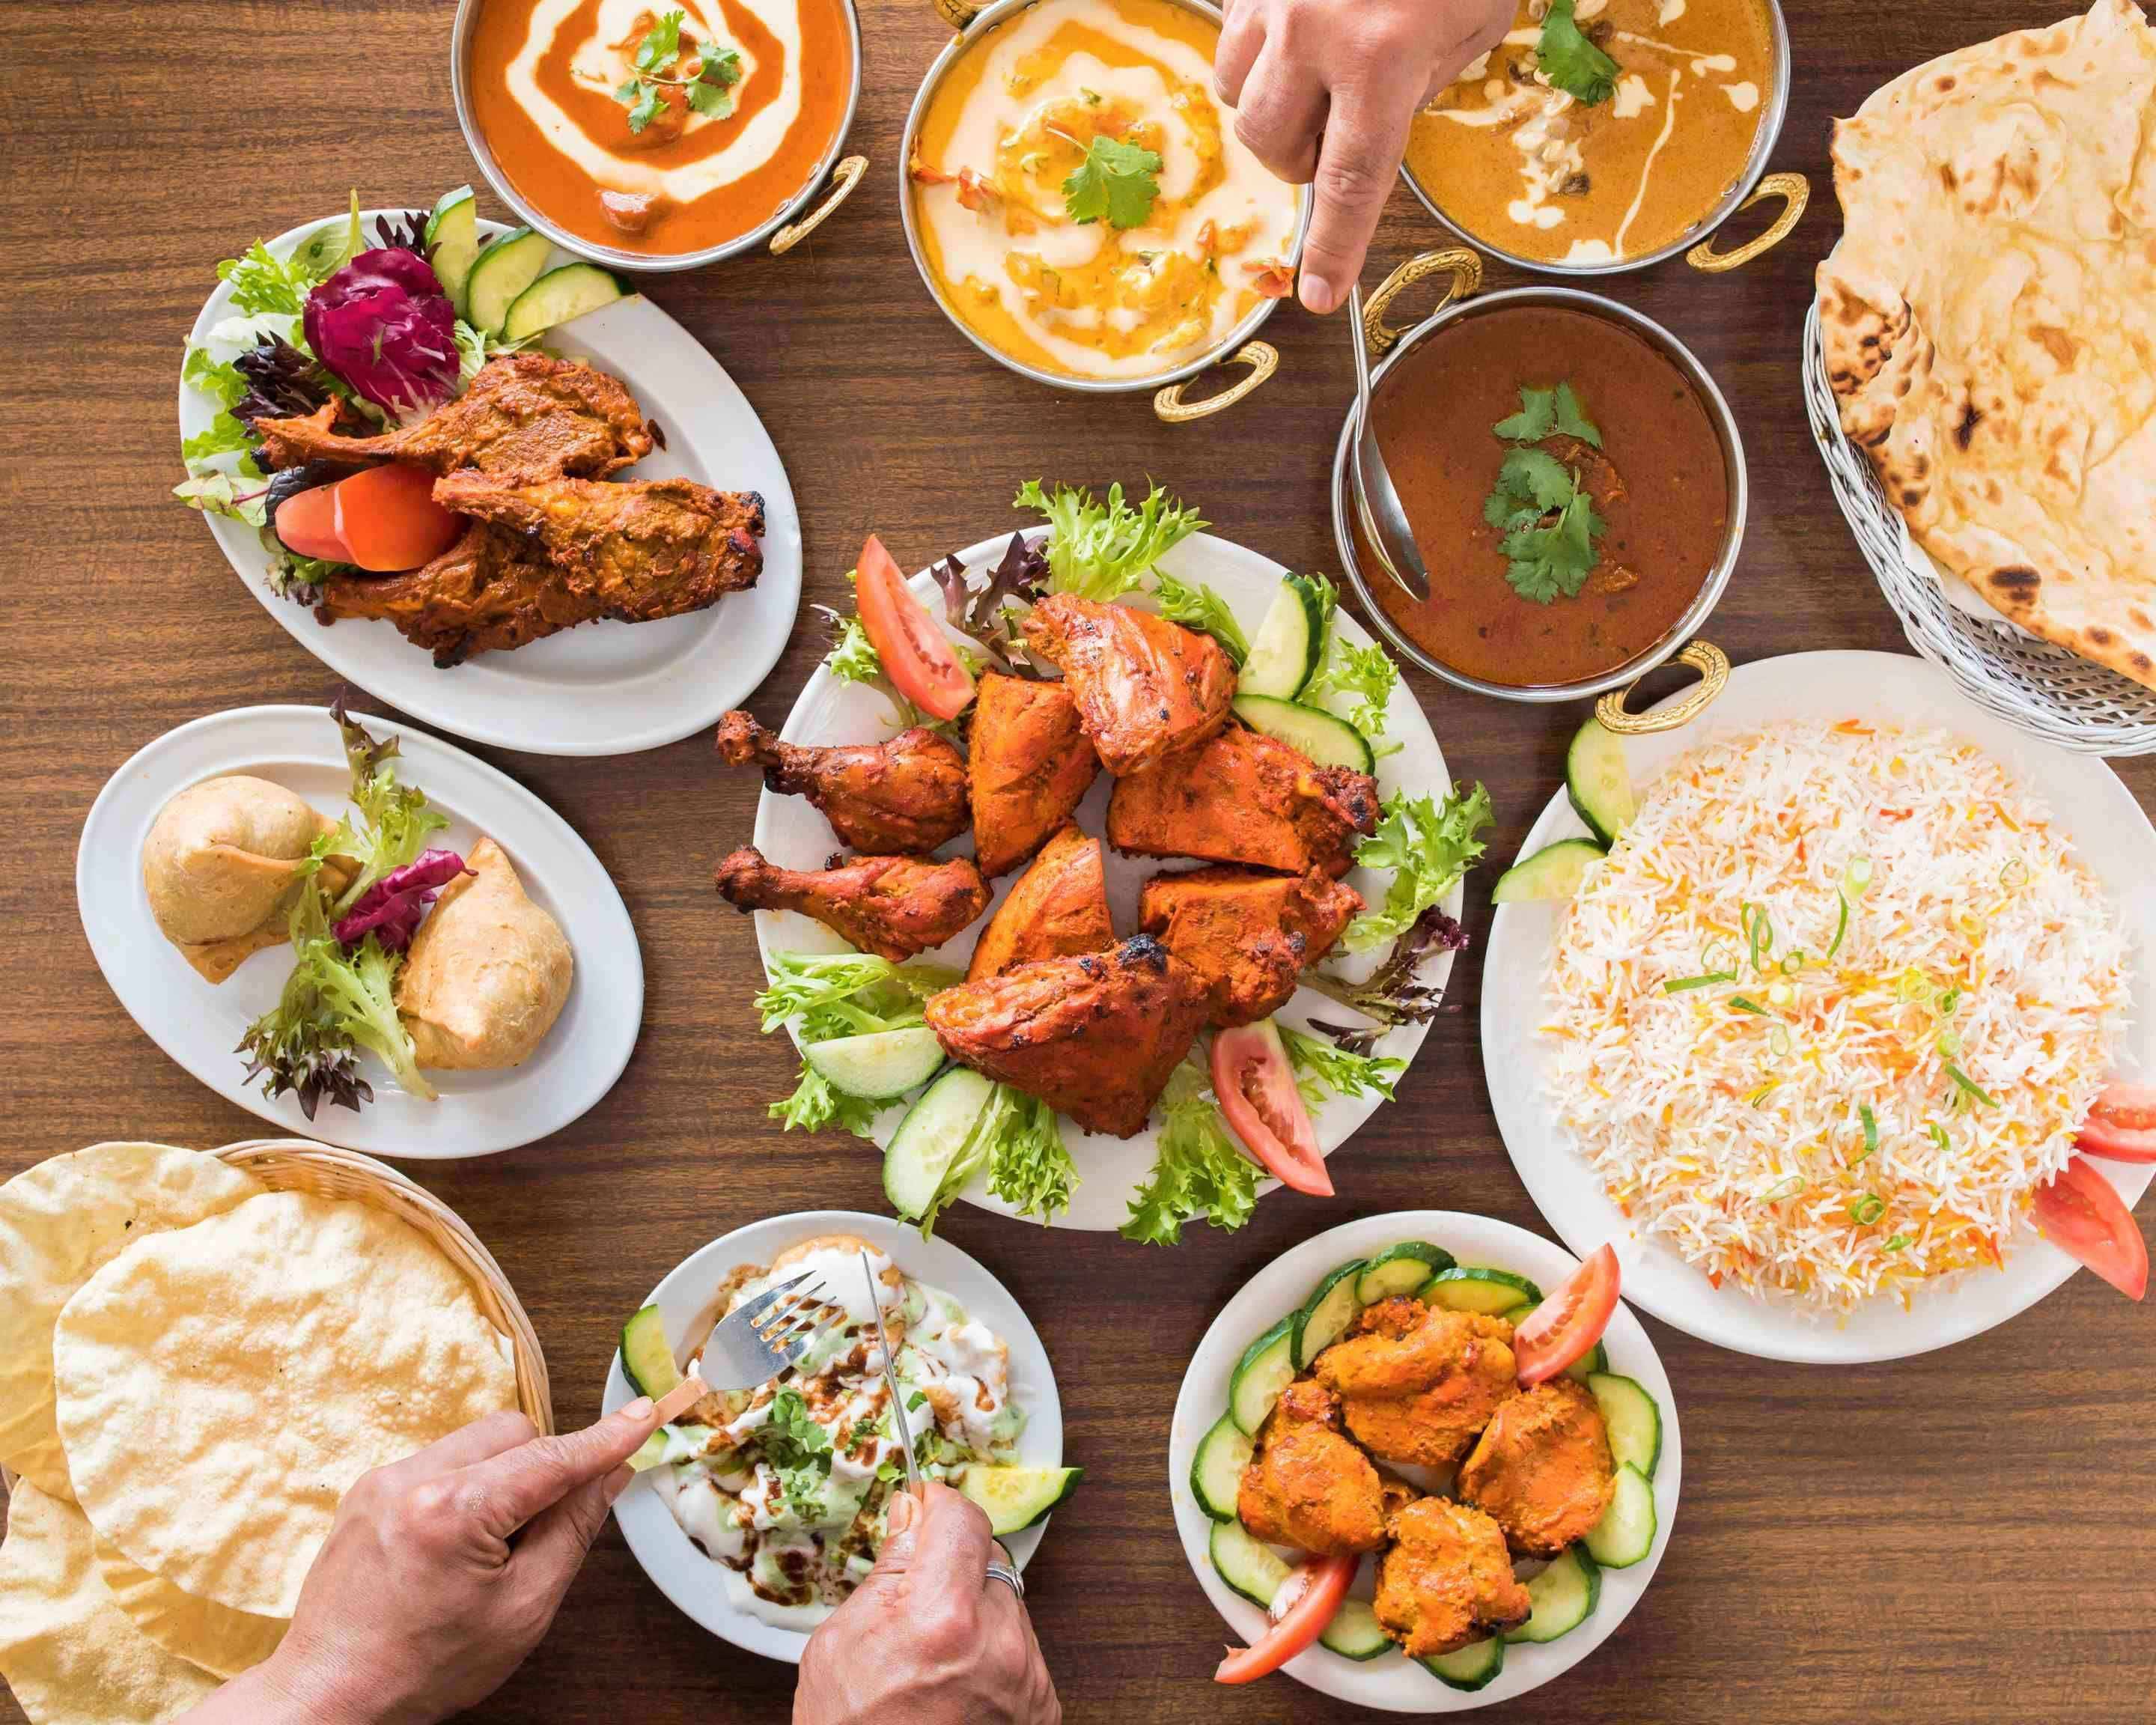 Bombay Club Menu Takeout in Melbourne | Delivery Menu & Prices | Uber Eats